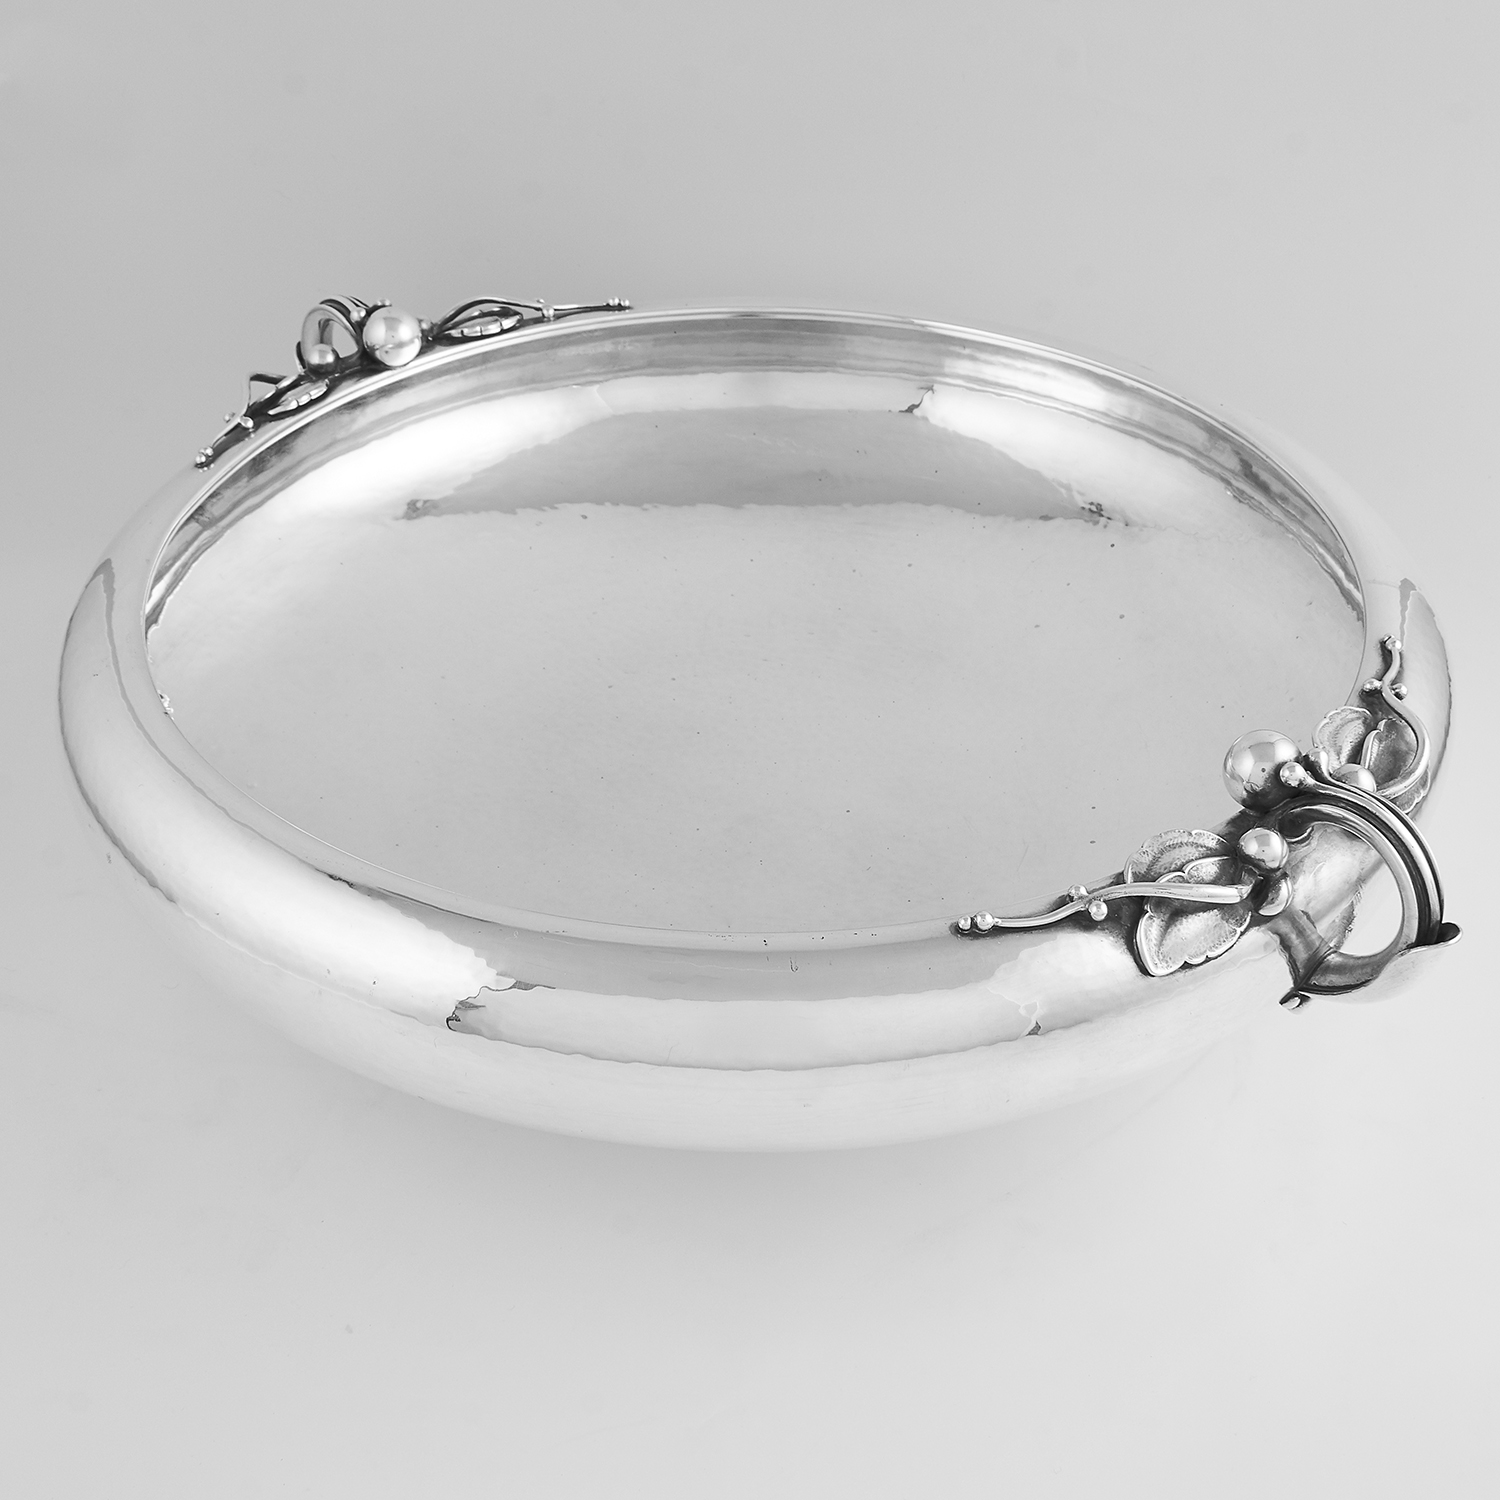 DANISH STERLING SILVER BOWL / CENTREPIECE, GEORG JENSEN POST 1945 design 625B, of circular form with - Image 2 of 3